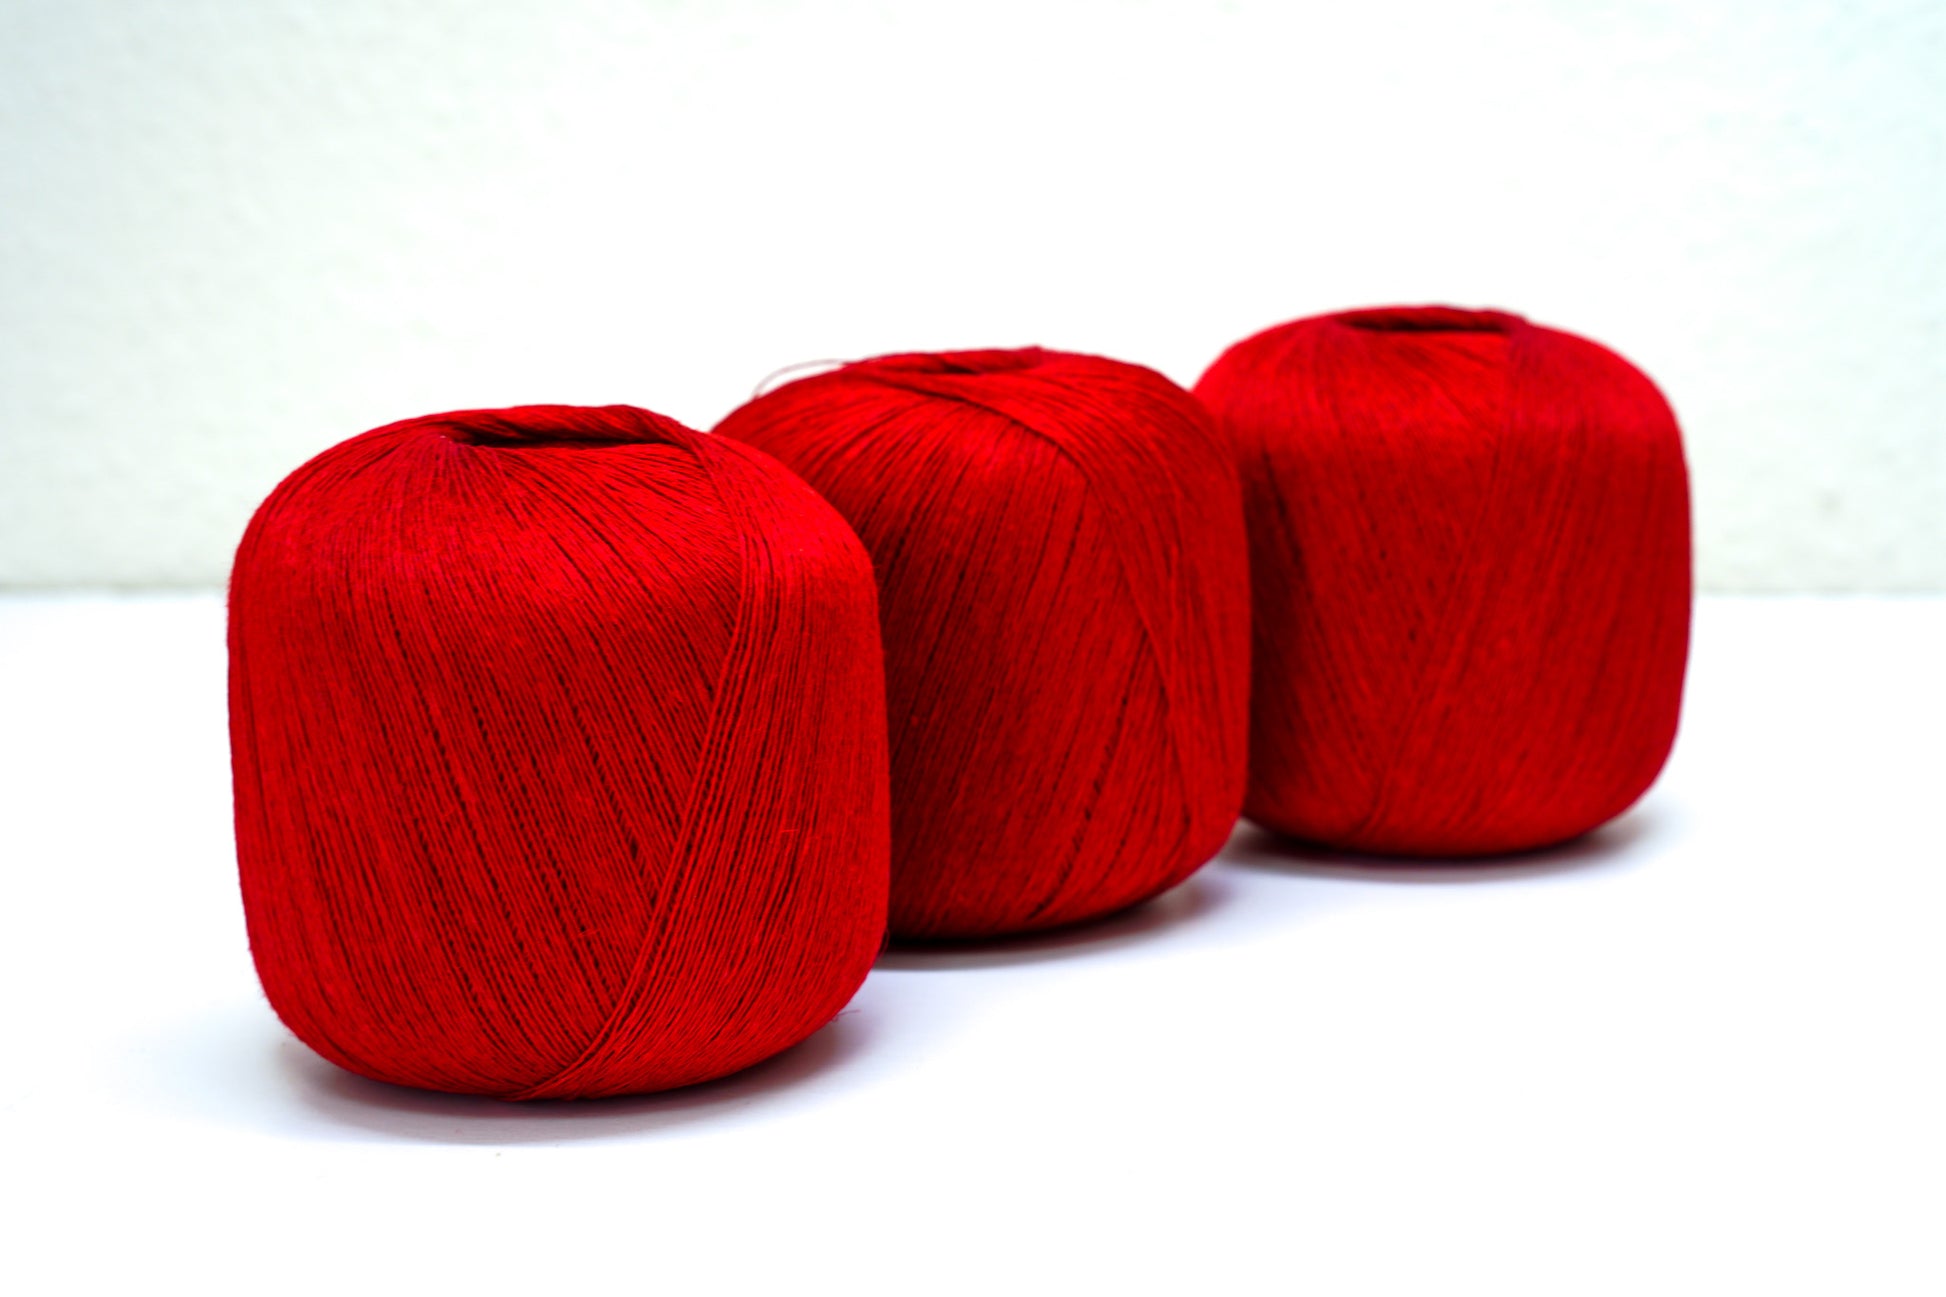 100% Linen Yarn in Bright Red Color